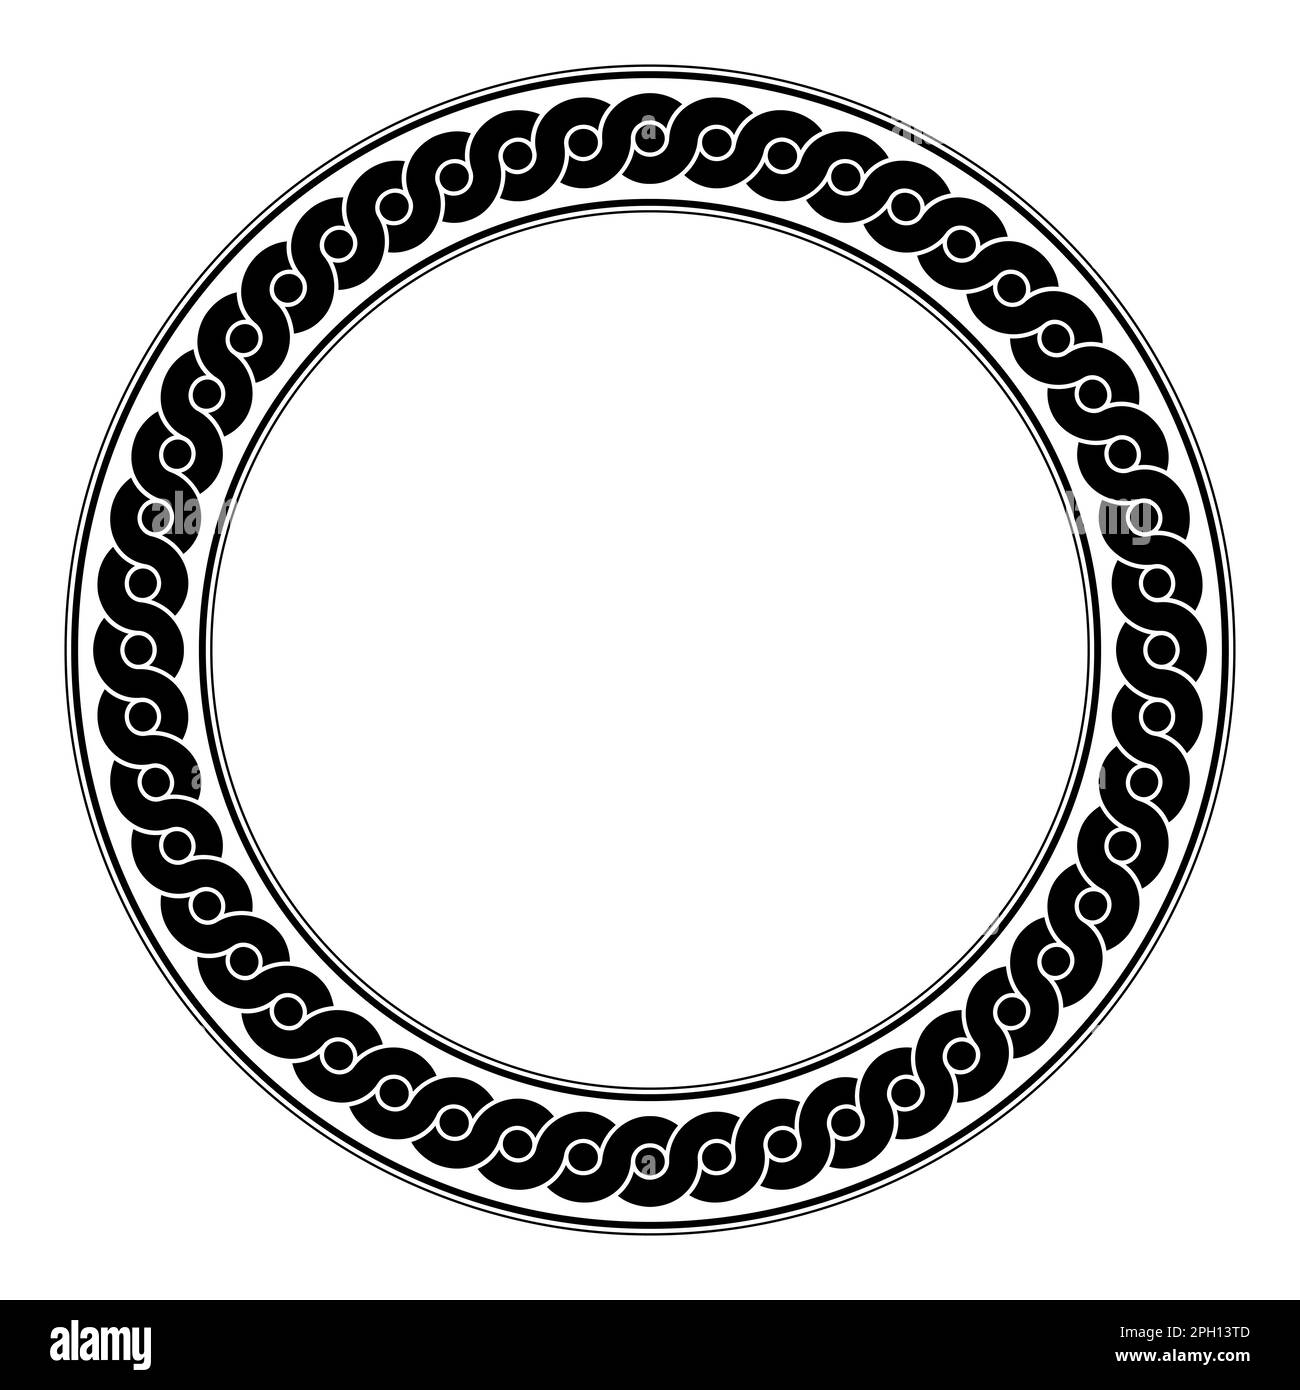 Intertwined wave pattern, circle frame. Black serpentine lines forming a circle border, with dots between the overlapping waves. Ancient greek pattern. Stock Photo